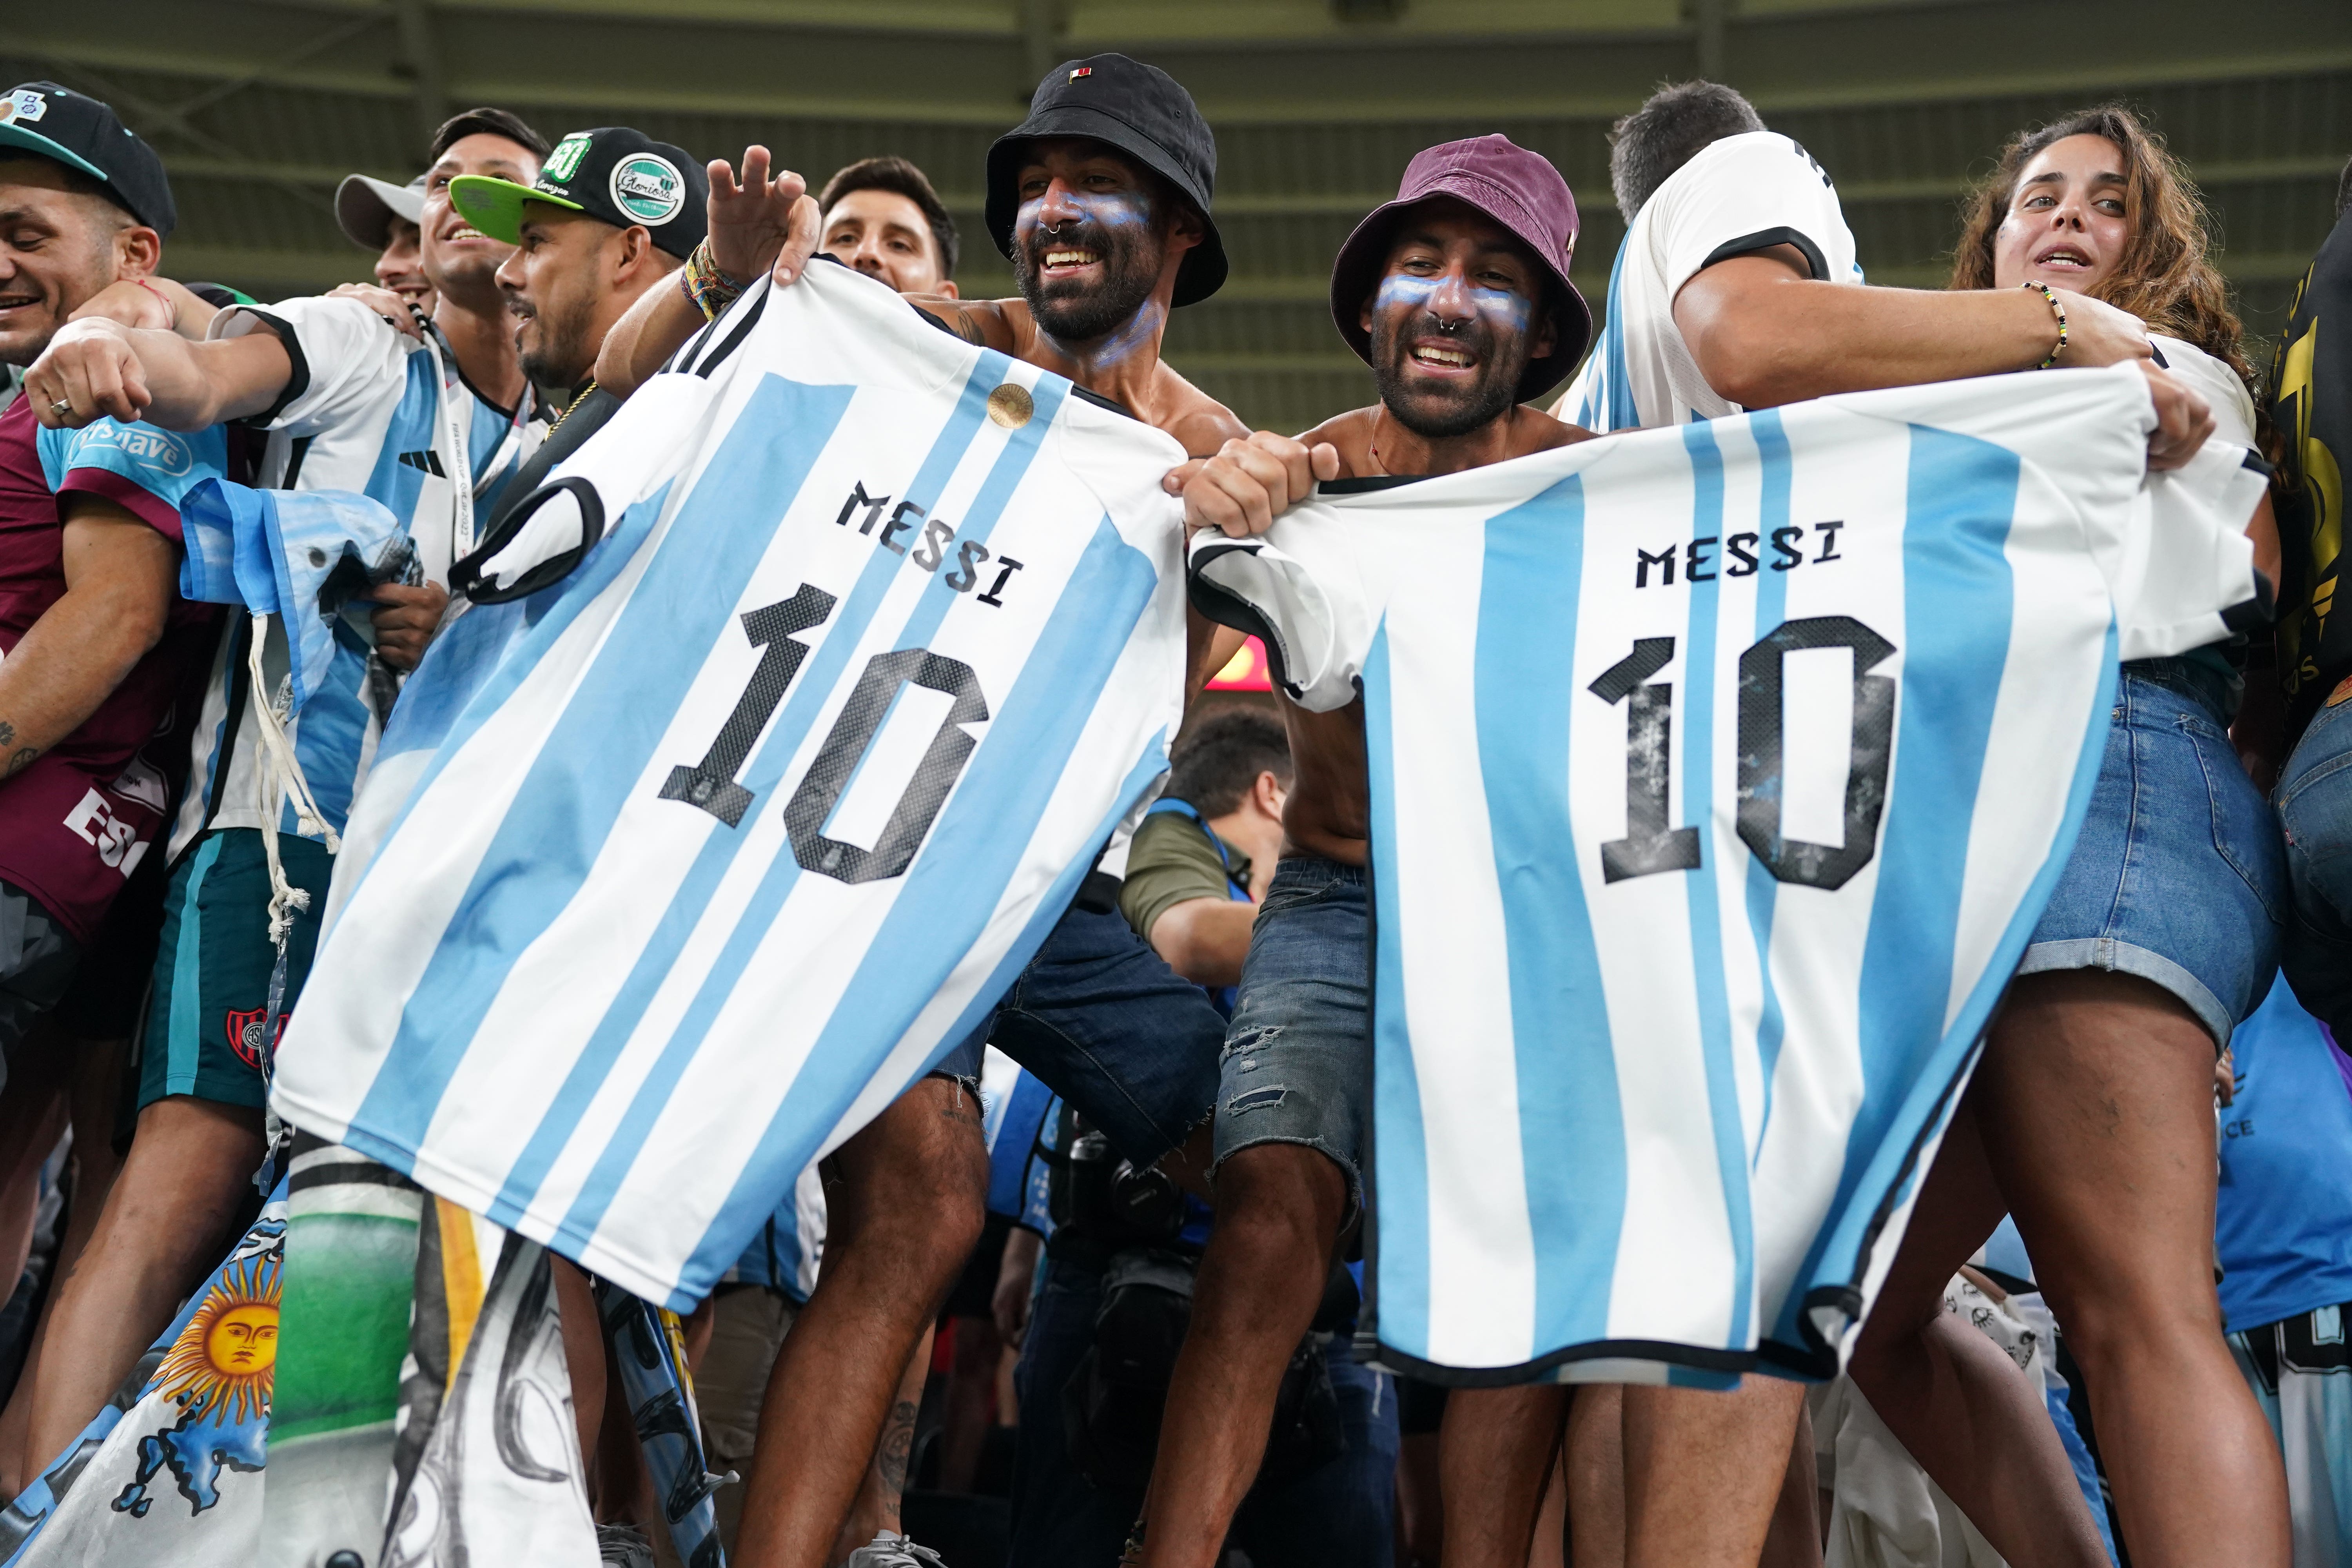 Love for Argentina' brings together 5,000 football fans in Qatar